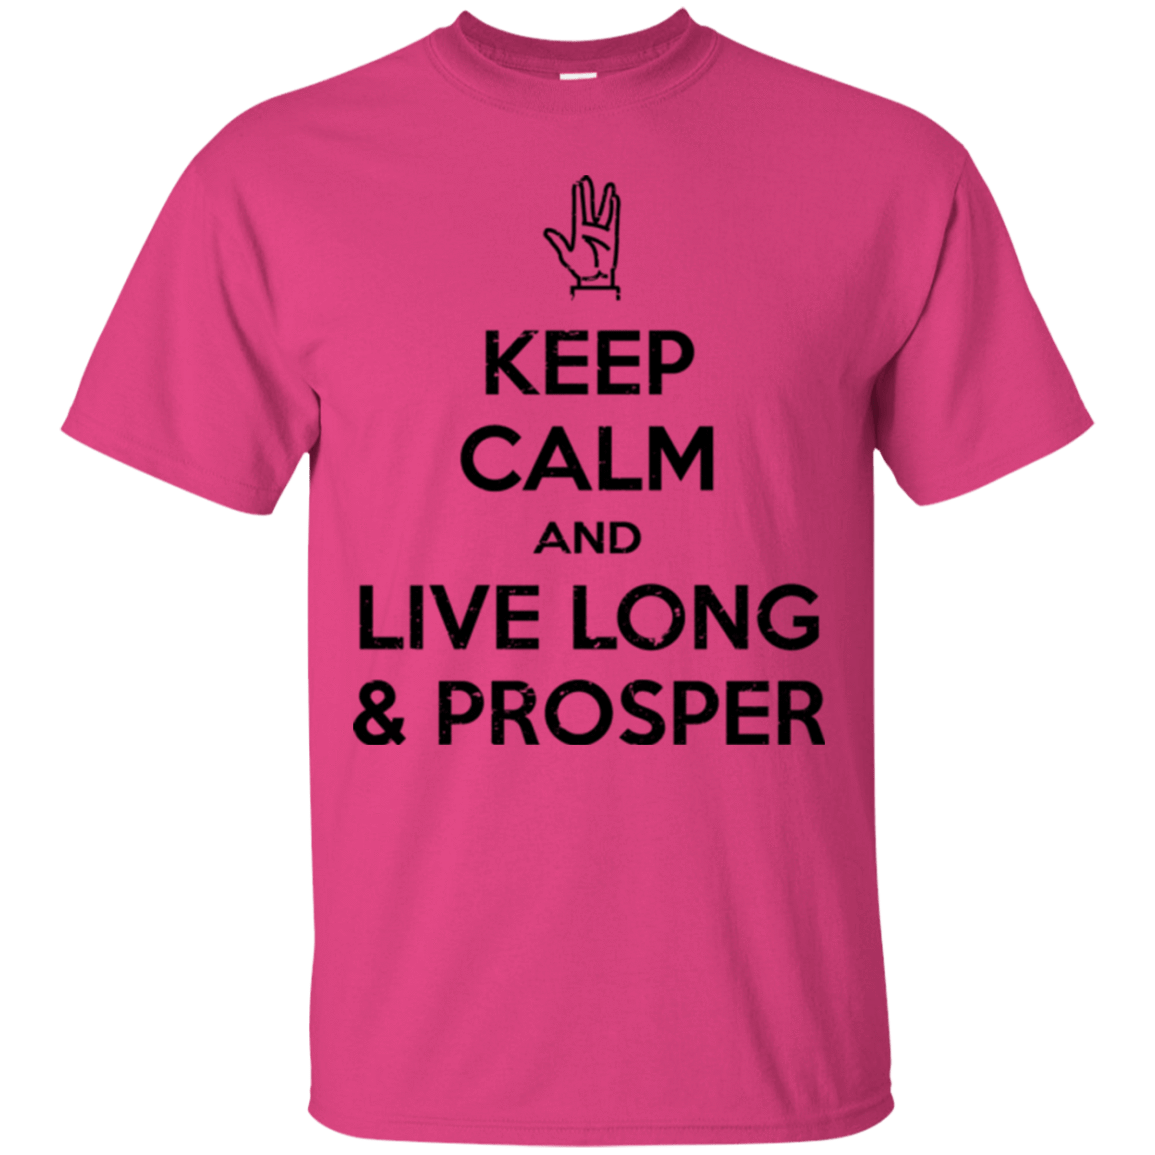 T-Shirts Heliconia / Small Keep calm prosper T-Shirt